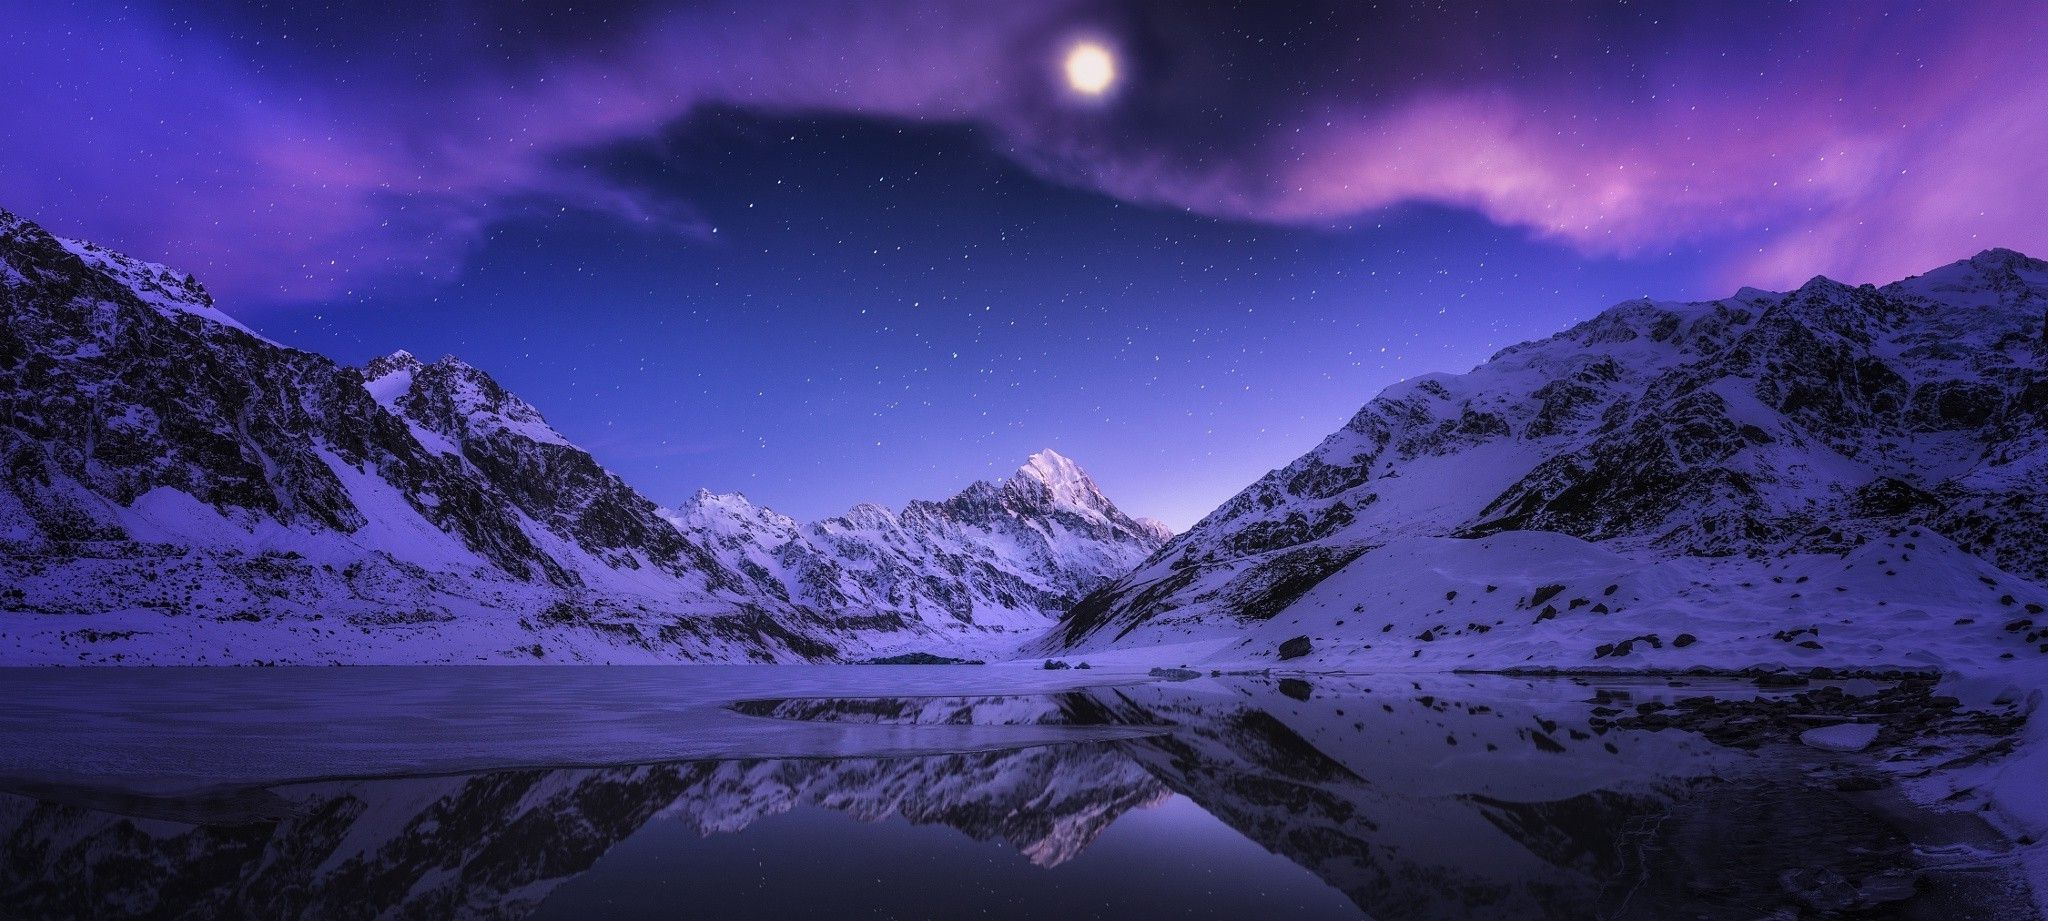 landscape, Nature, Lake, Mountain, Snow, Reflection, Stars, Evening, Moon, Clouds, Moonlight, New Zealand Wallpaper HD / Desktop and Mobile Background